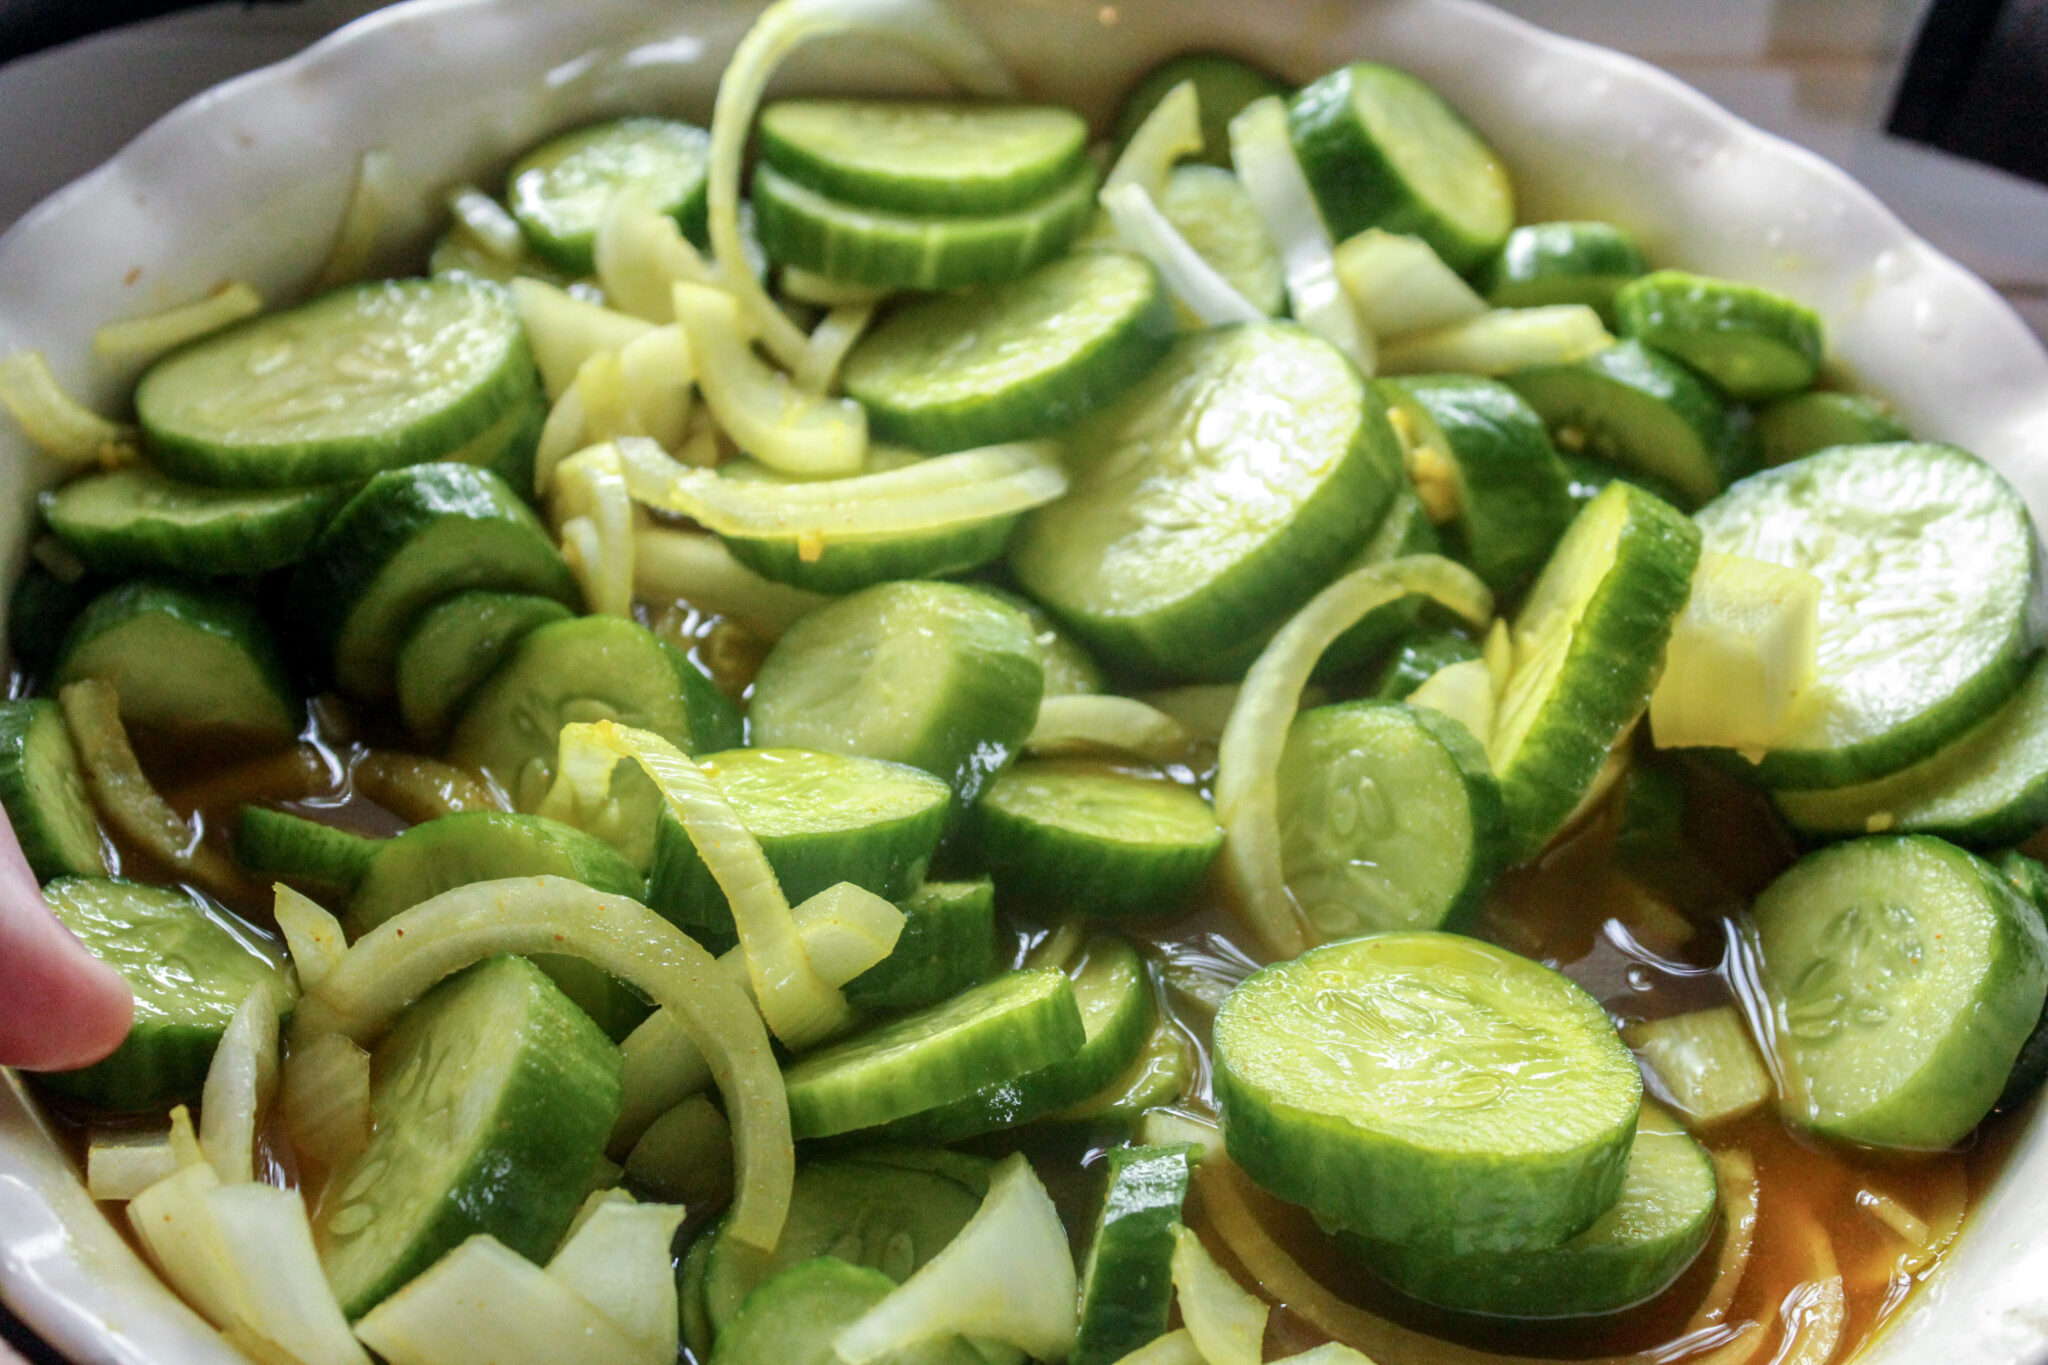 My Bread and Butter Refrigerator Pickles are sugar-free and a THM:FP! 